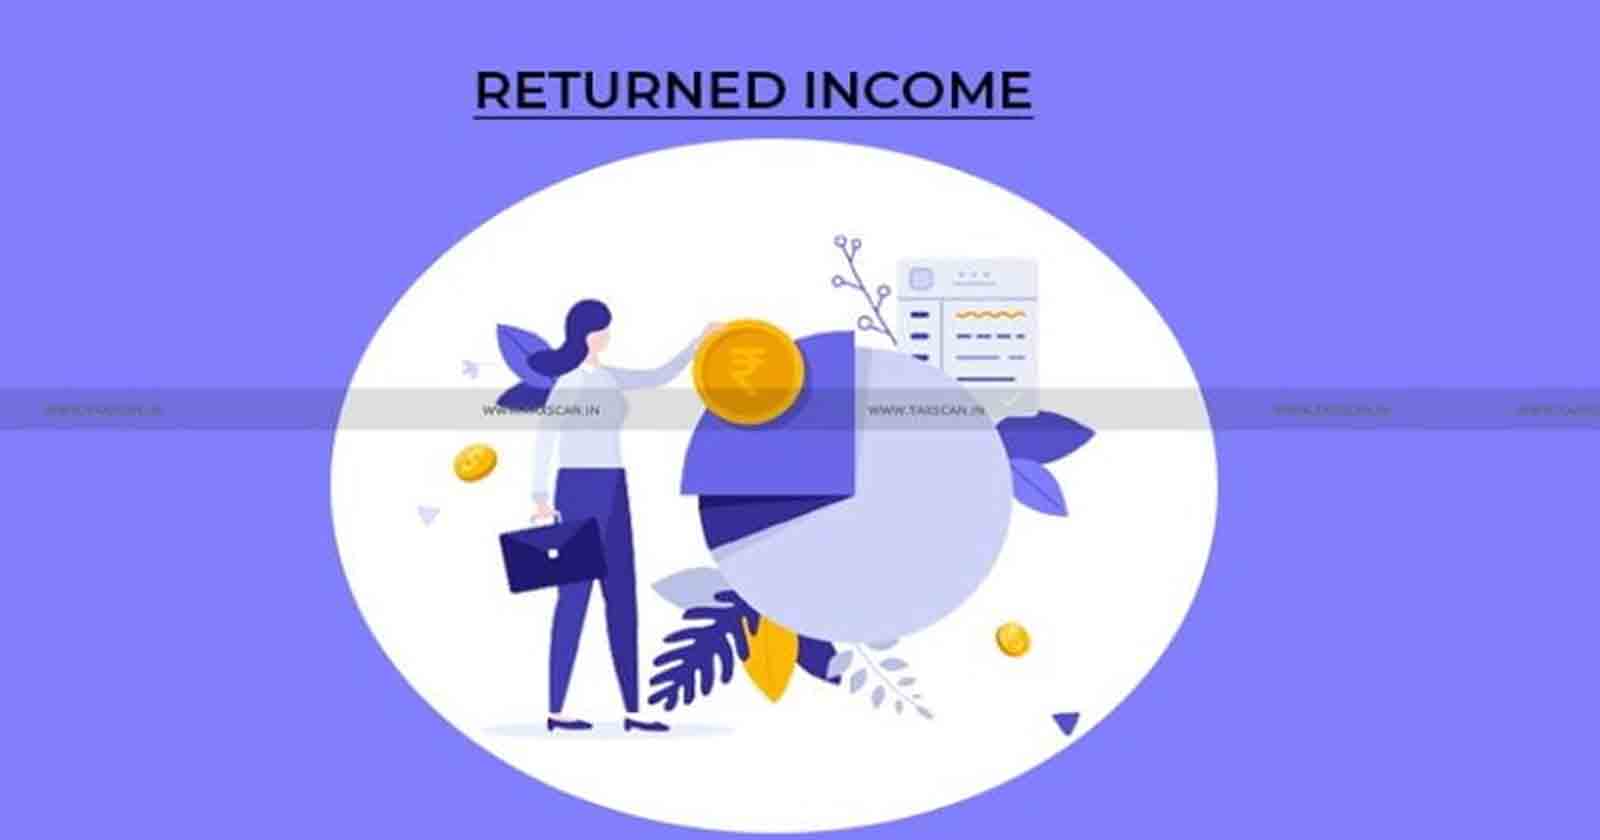 Interest - Against EY - Global - Delivery - Levied - Returned Income - Assessed income - ITAT - TAXSCAN